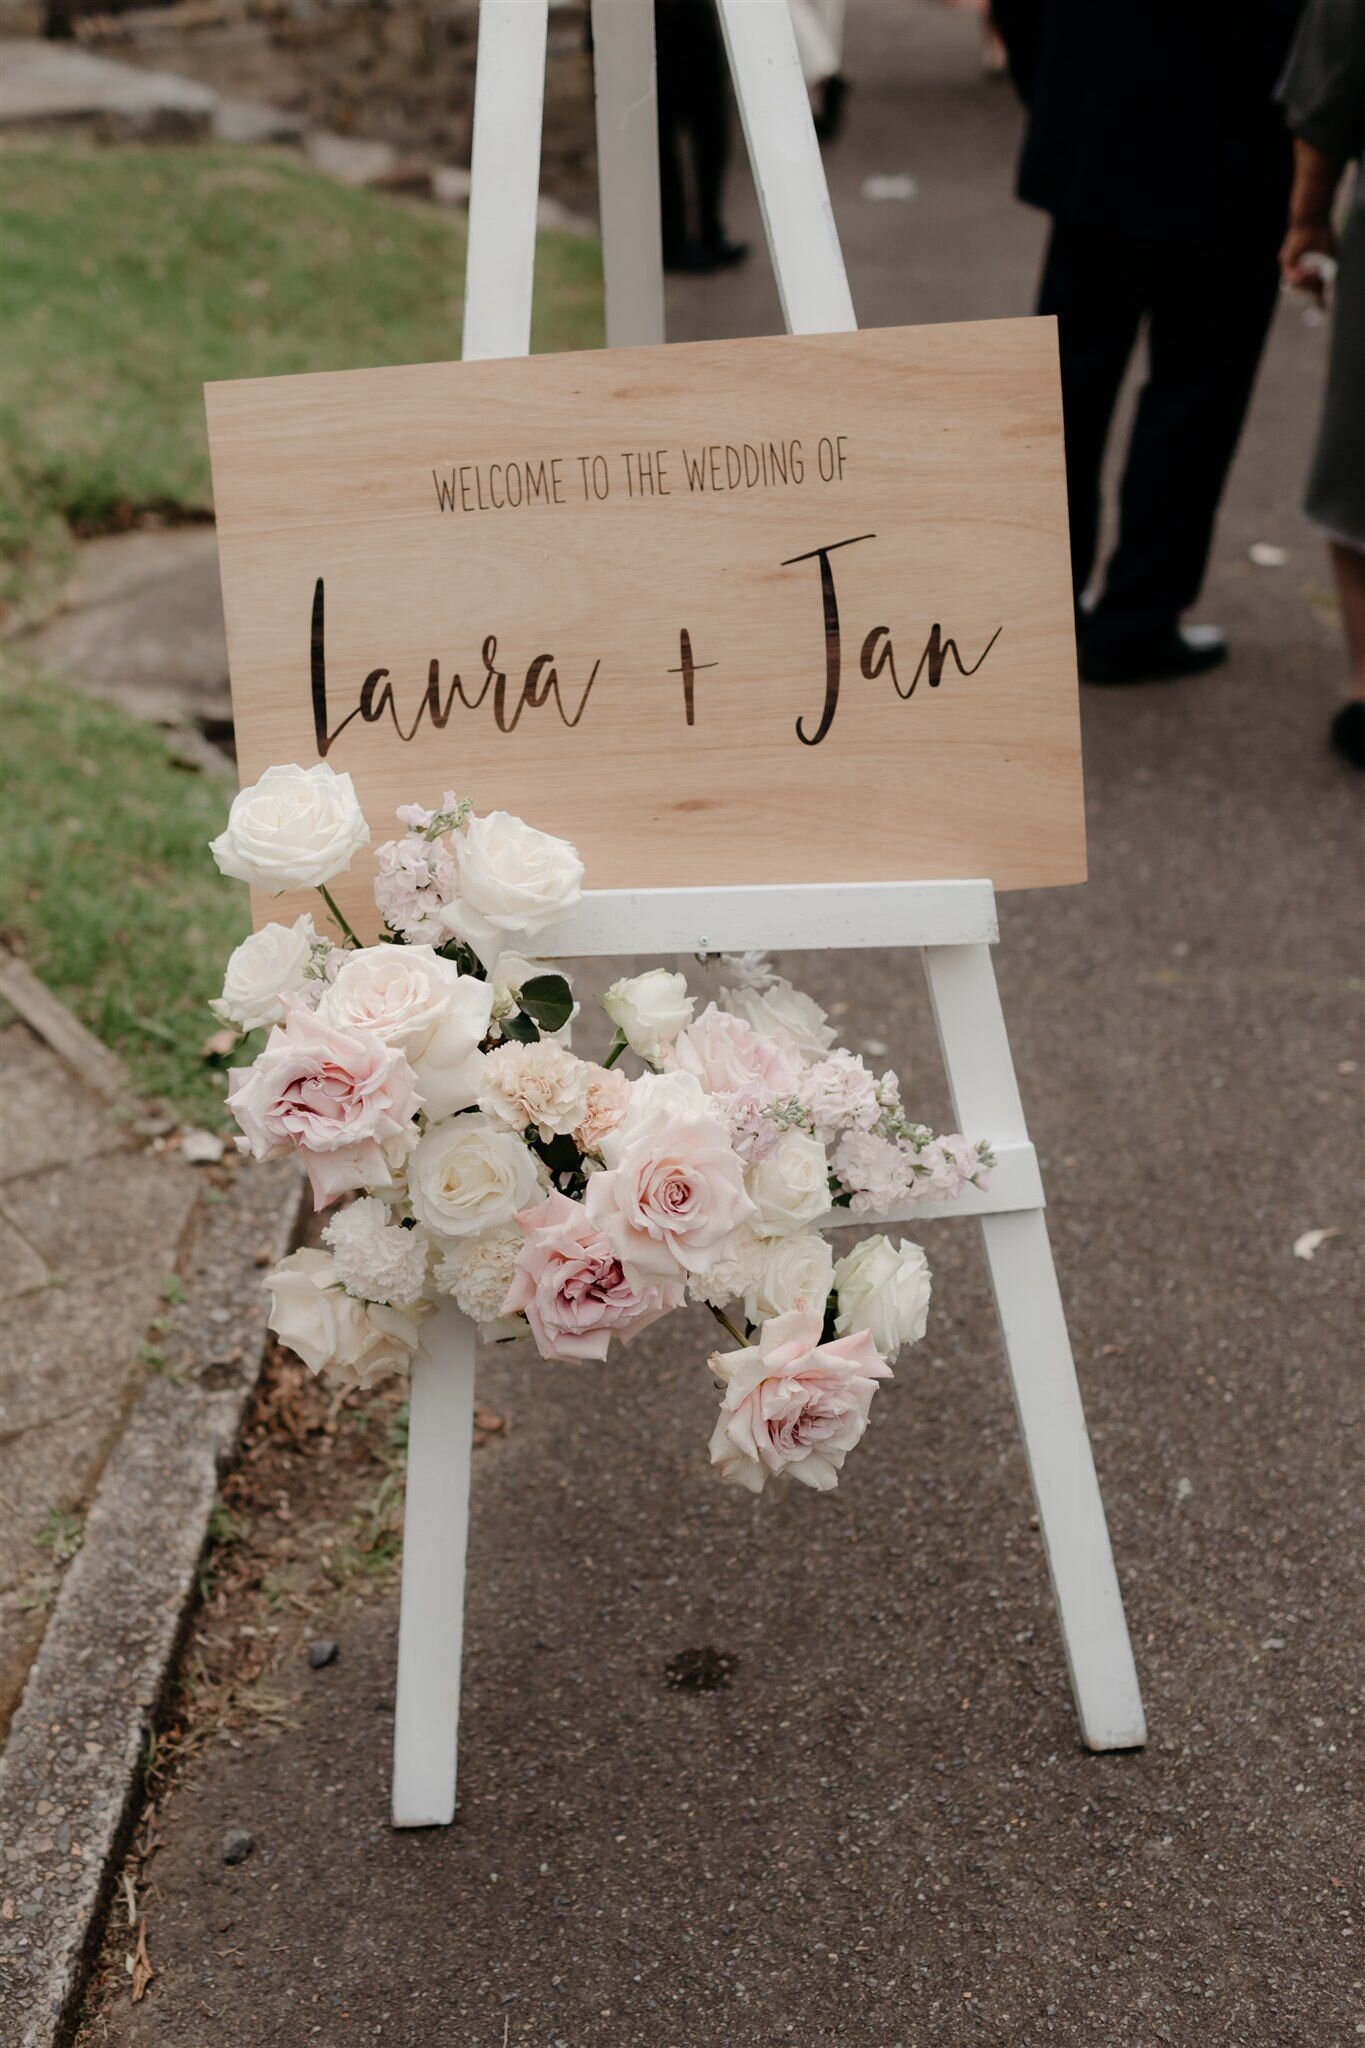 Wedding welcome sign with flowers